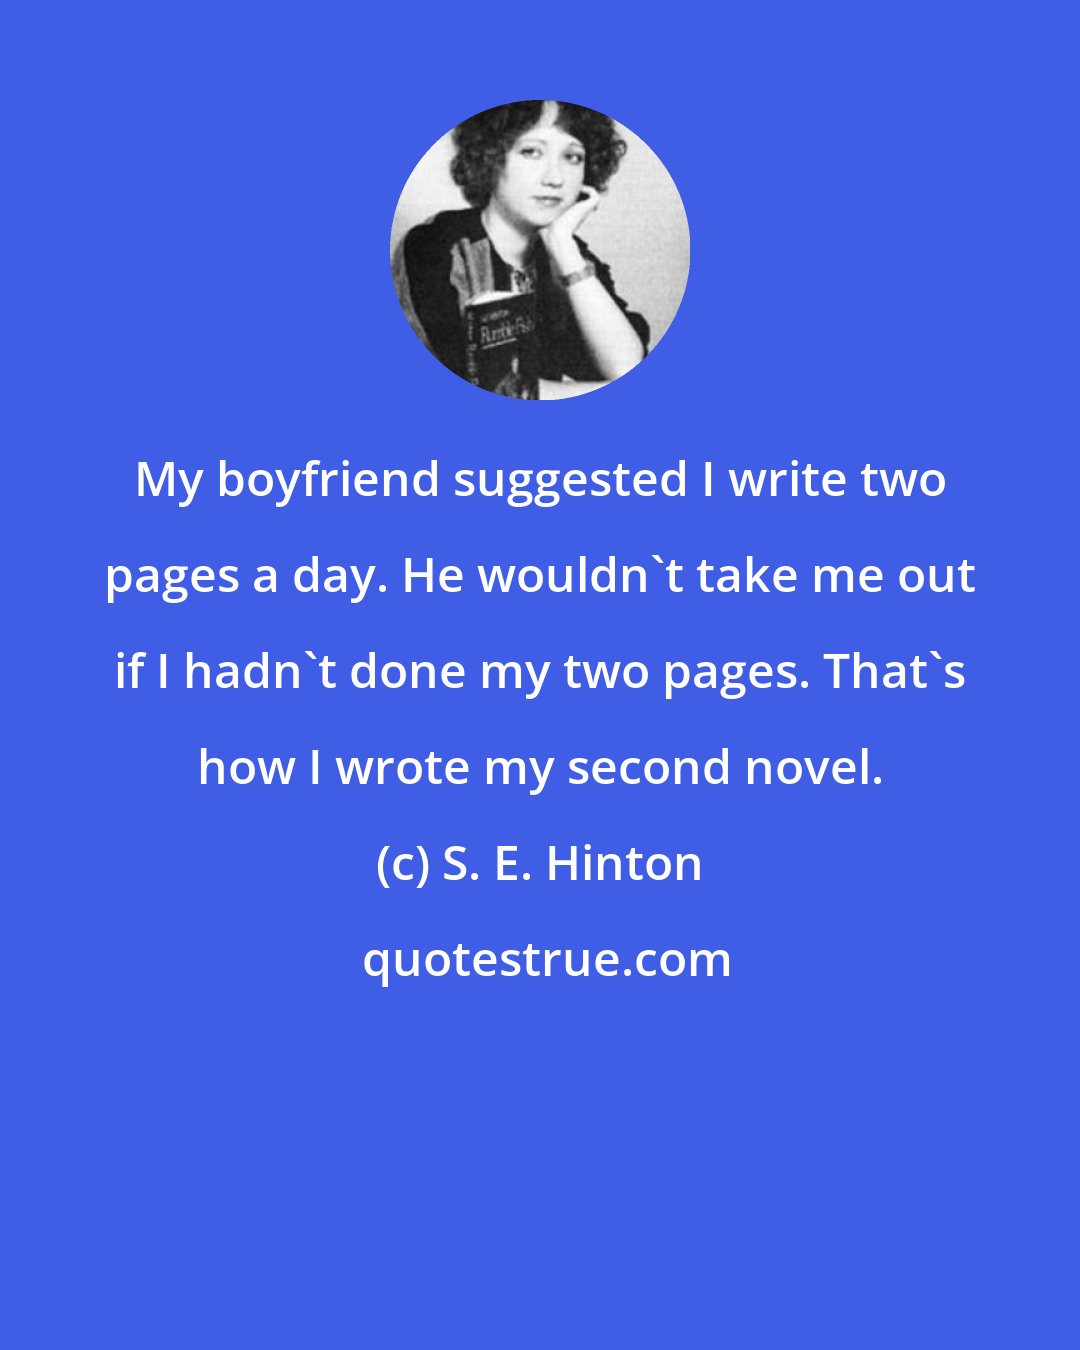 S. E. Hinton: My boyfriend suggested I write two pages a day. He wouldn't take me out if I hadn't done my two pages. That's how I wrote my second novel.